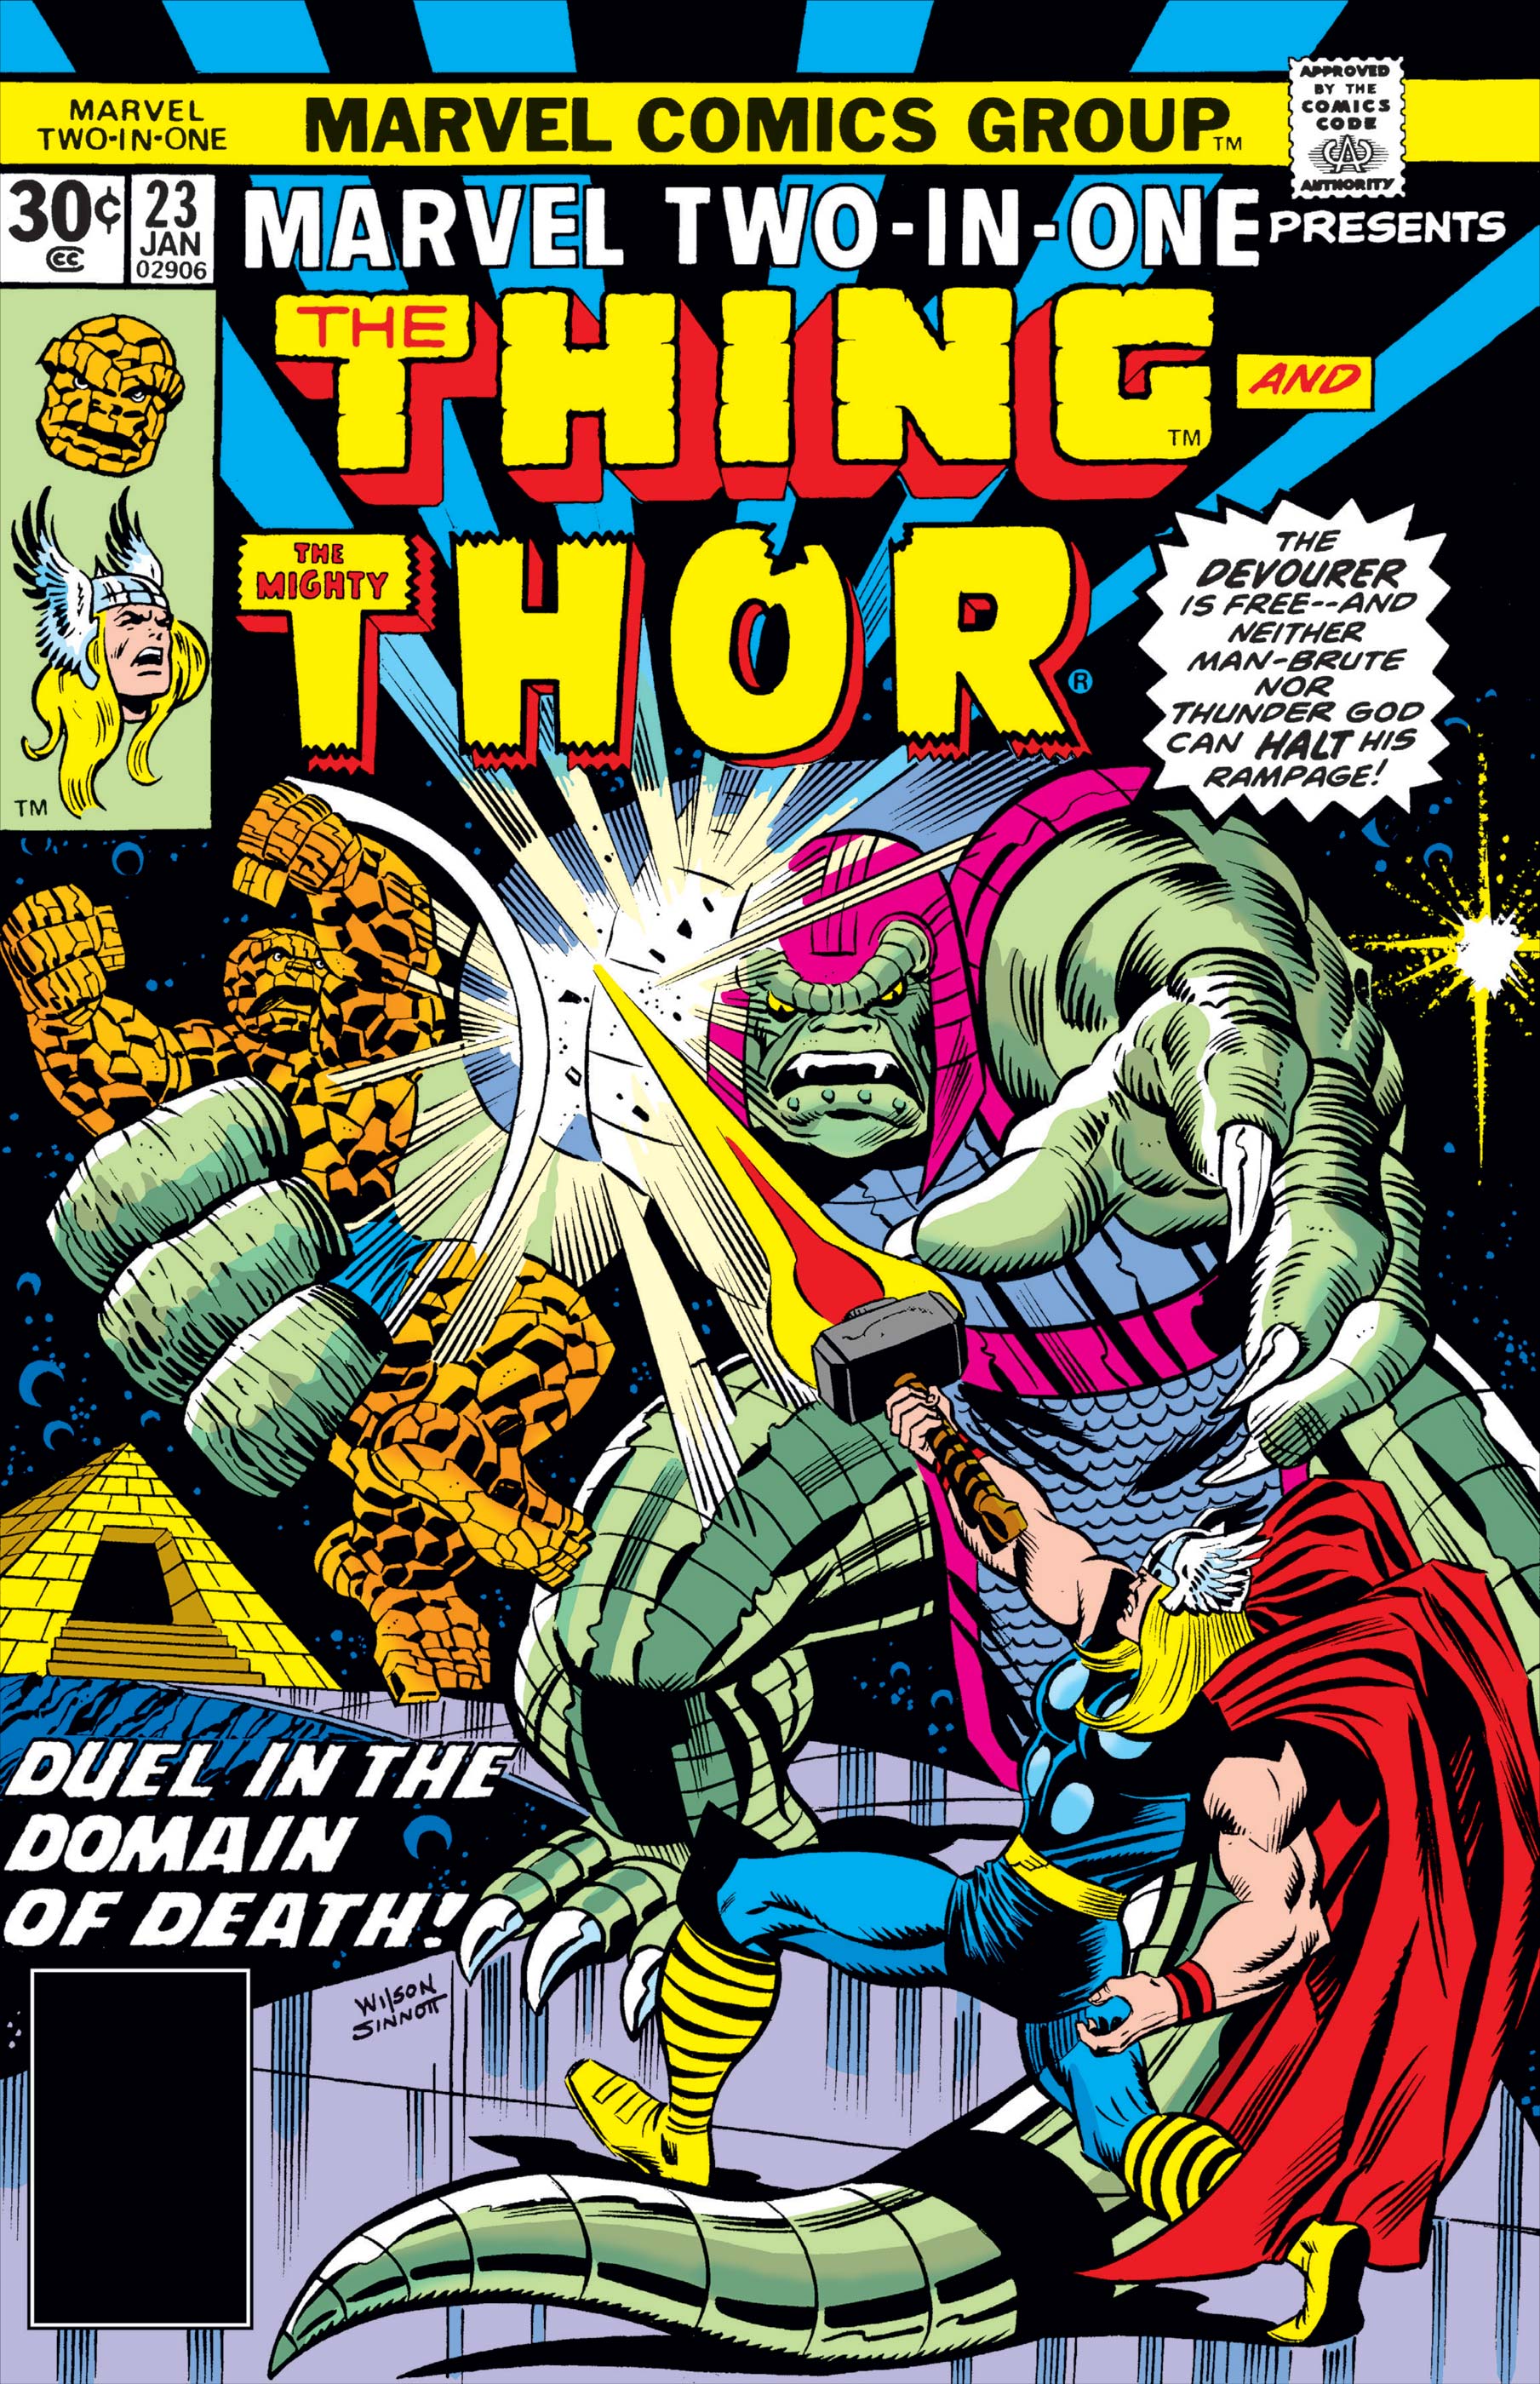 Marvel Two-in-One (1974) #23